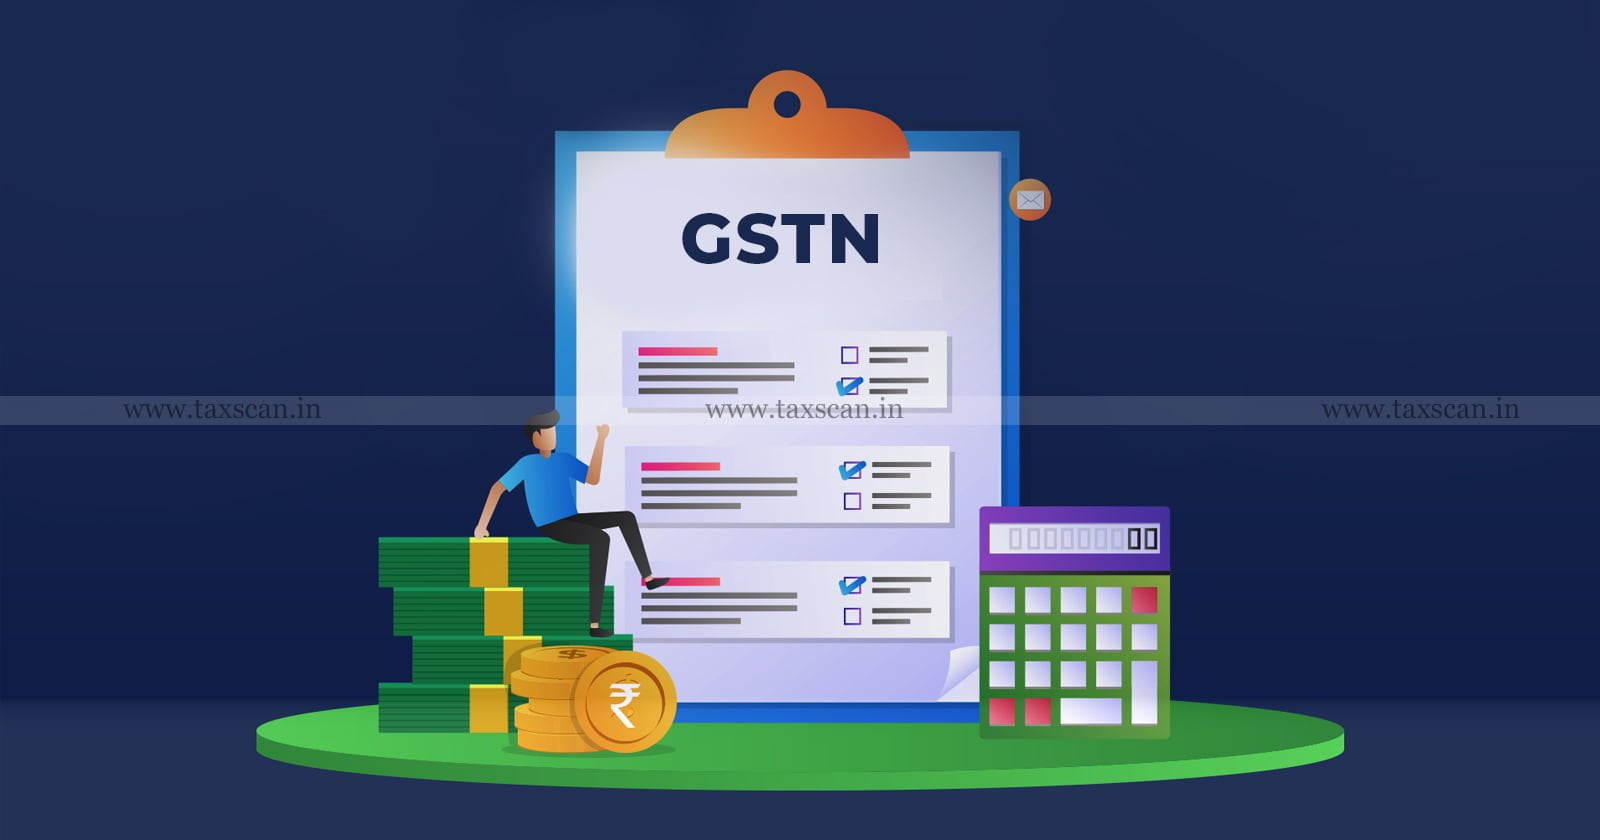 GSTN issues New Functionality - GSTN - New Functionality - Document Reference Number - Offline Communications - GST Authorities - taxscan